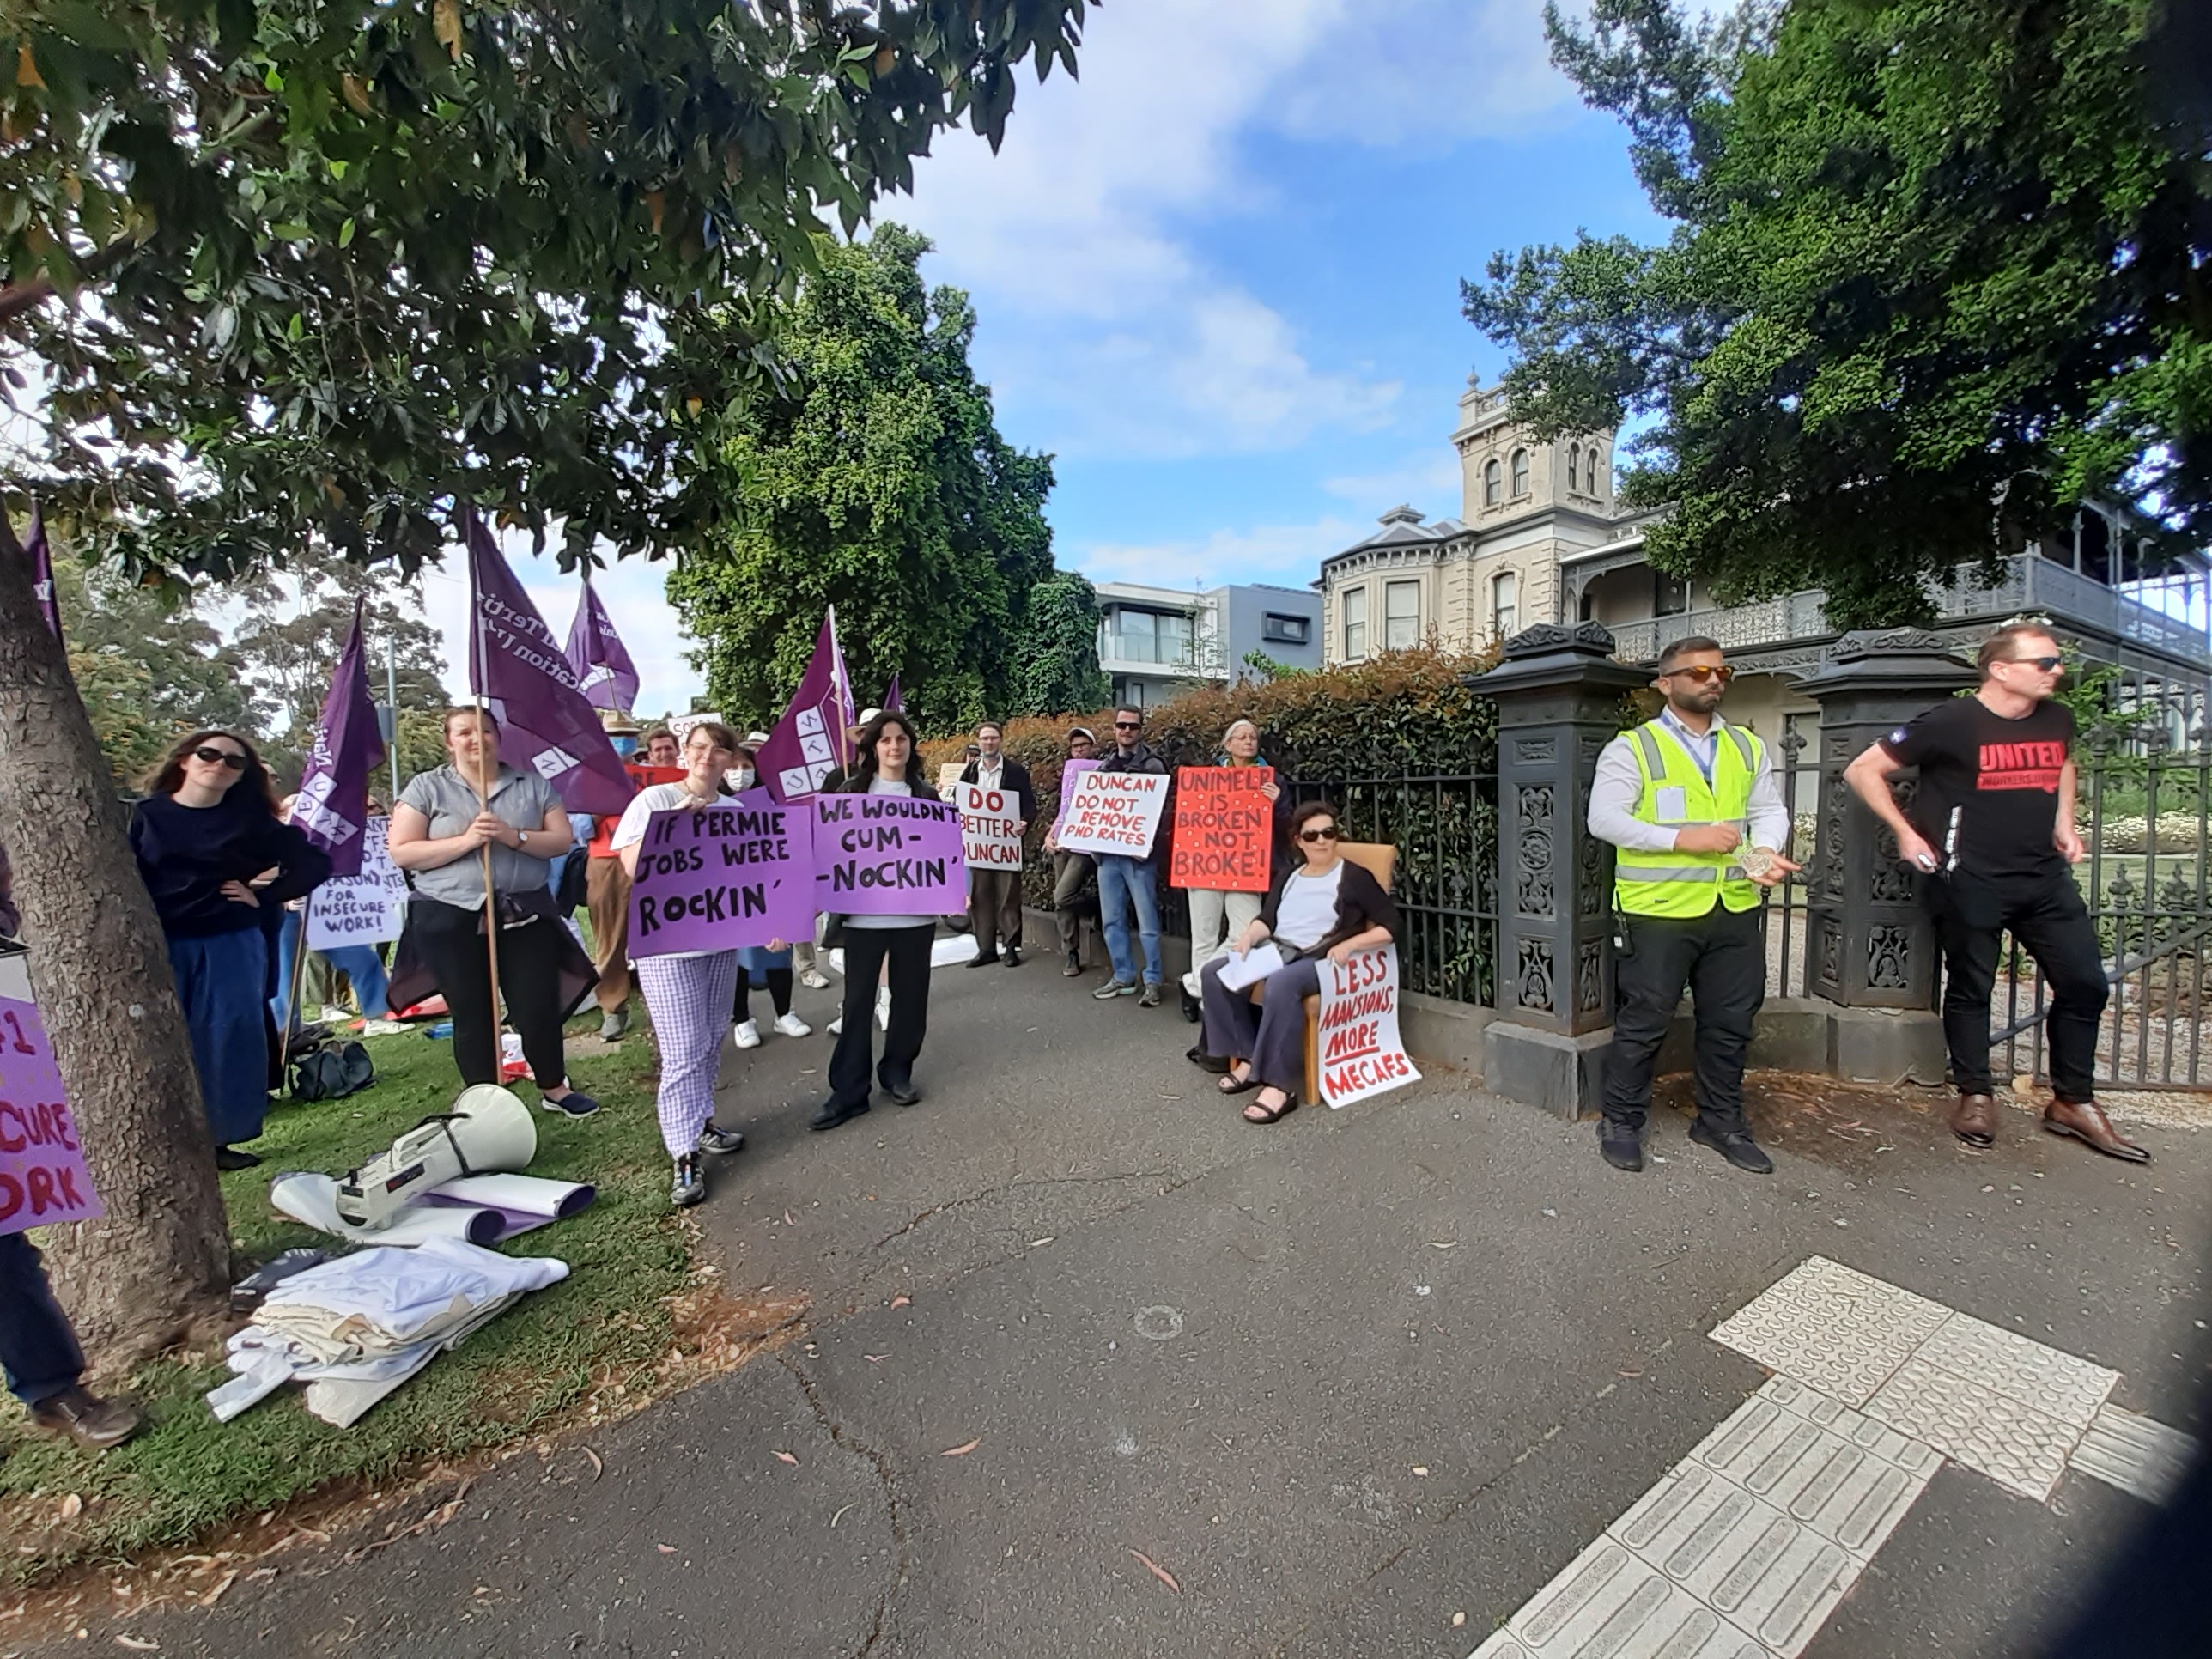 NTEU outside the mansion Melb Uni can afford instead of paying staff